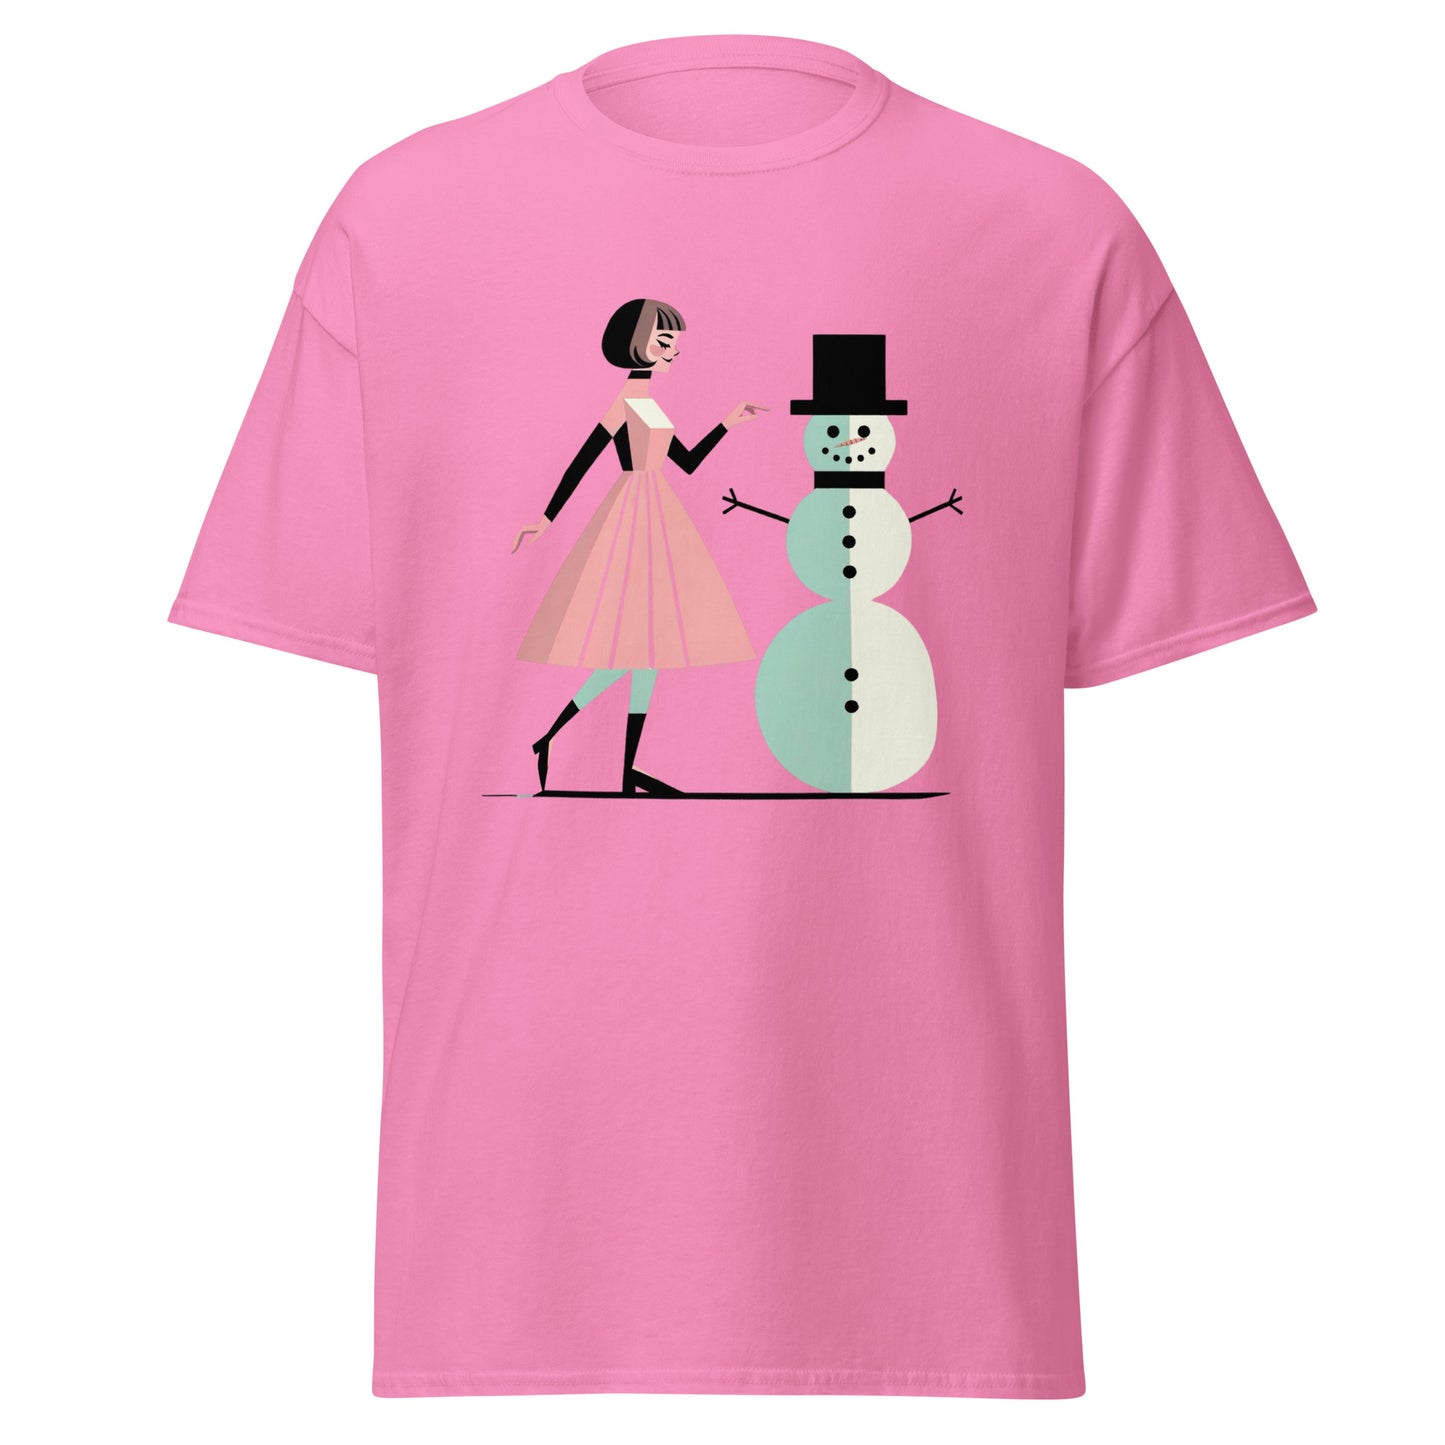 Frosty Waltz: Enchanted Winter Dance - A Girl and Her Snowman